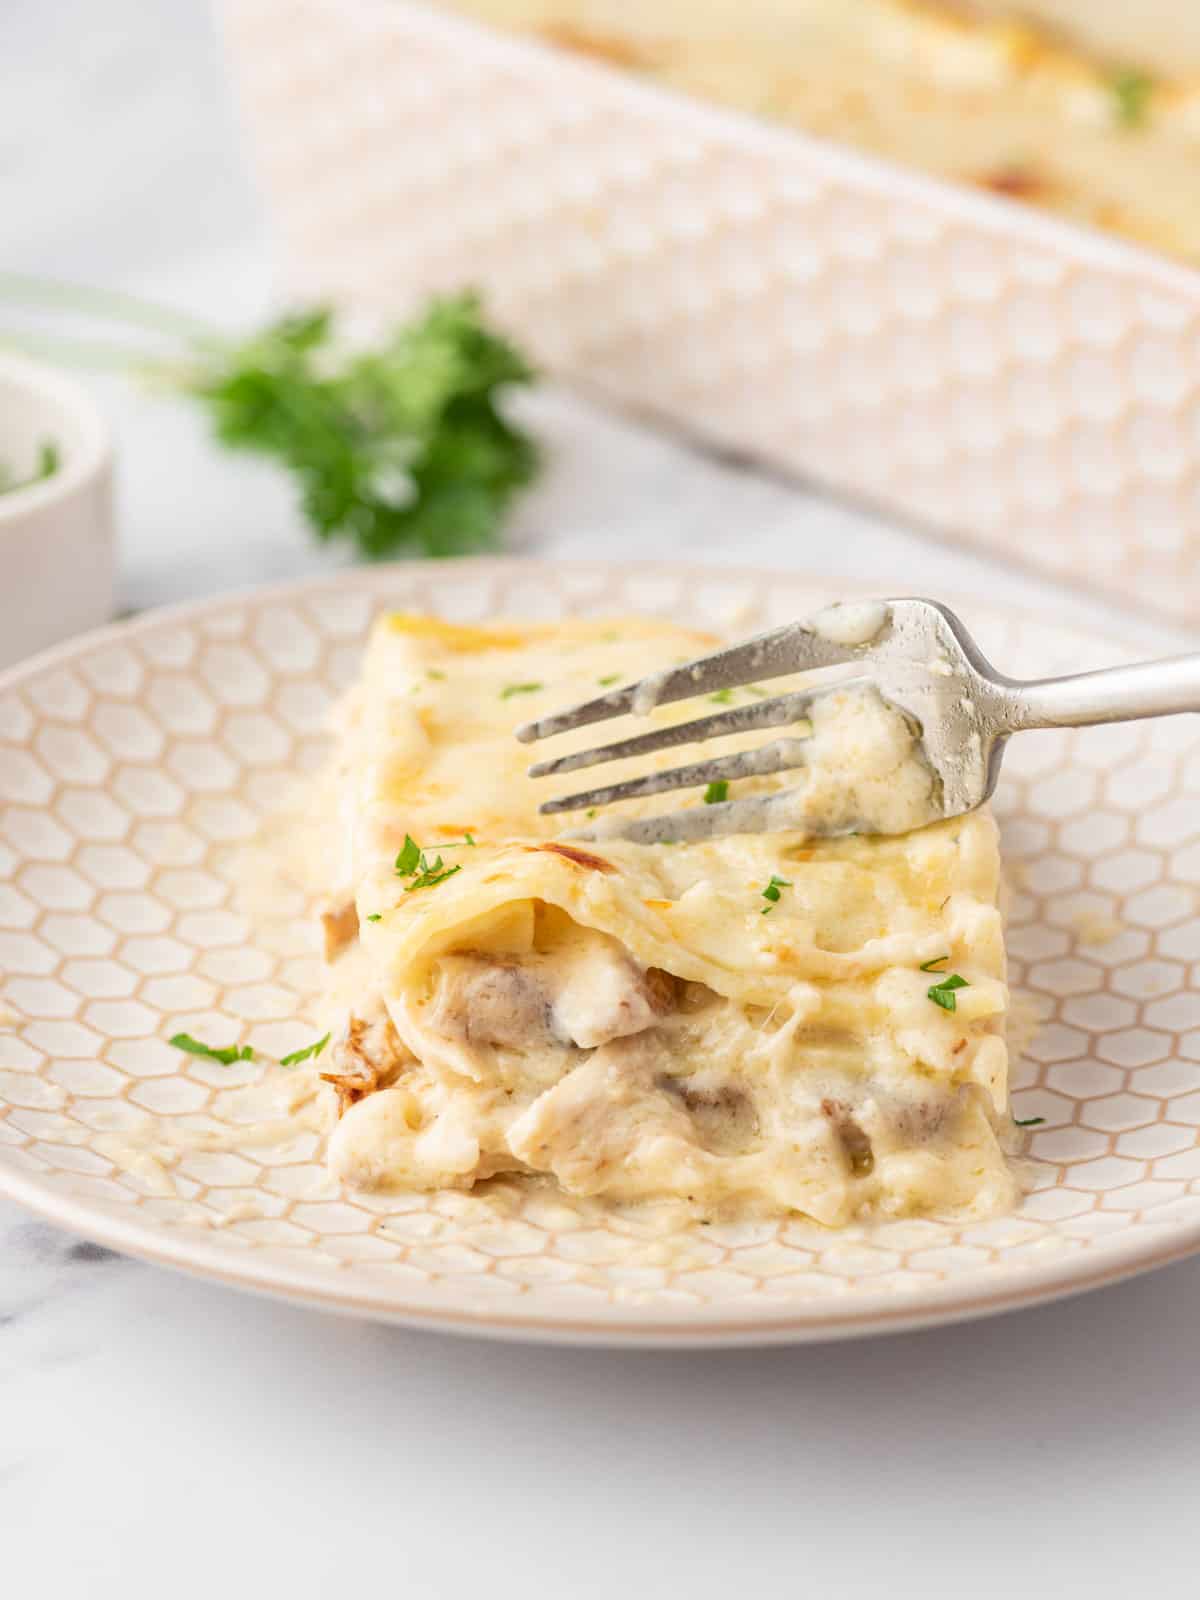 Chicken lasagna with white sauce on a plate as a fork cuts into it.